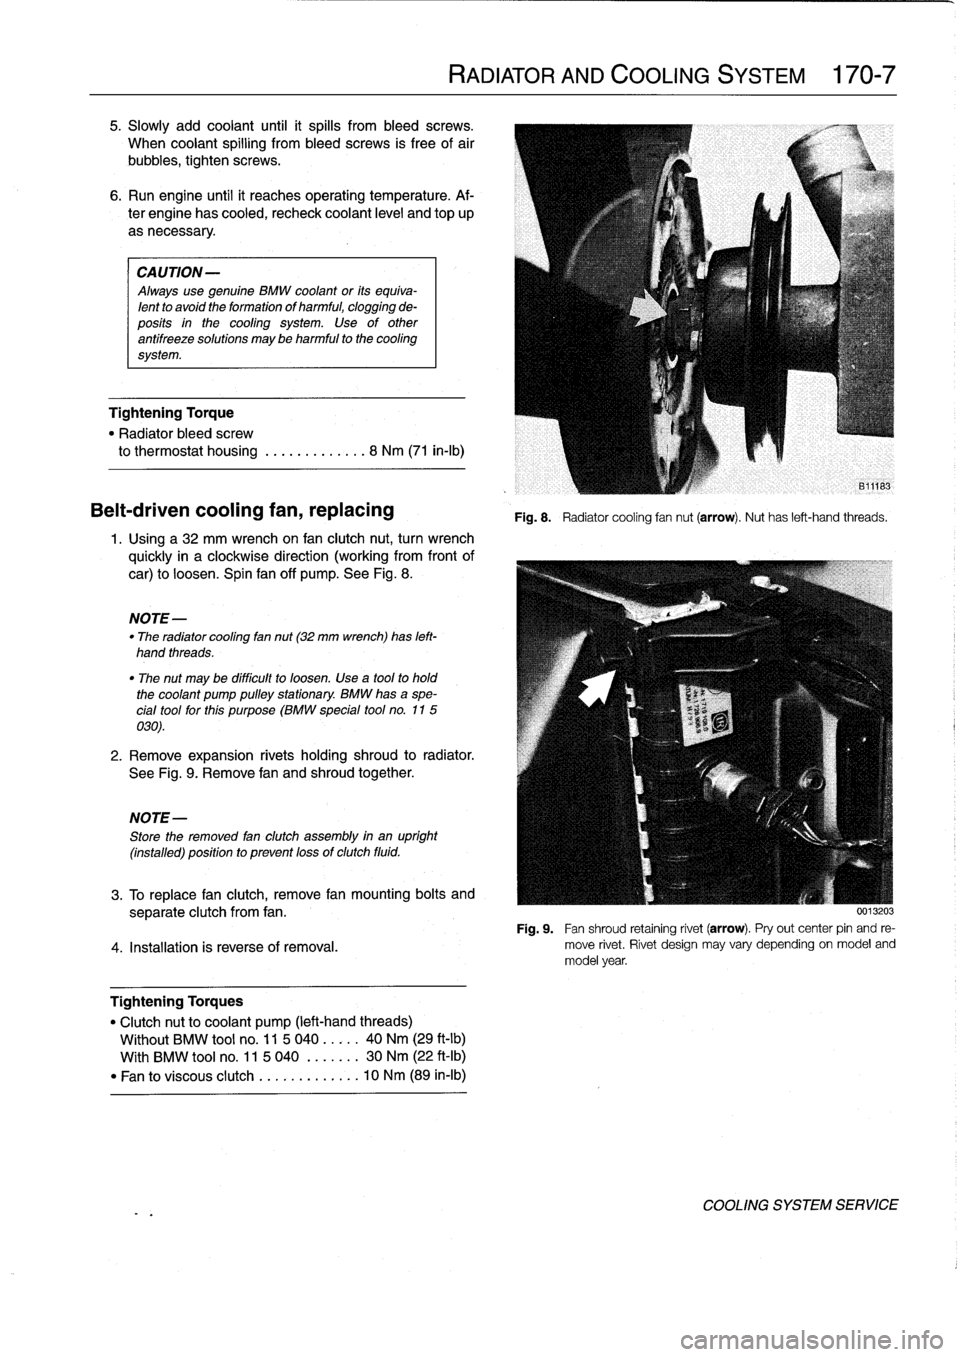 BMW 323i 1998 E36 Workshop Manual 5
.
Slowly
add
coolant
until
it
spills
from
bleed
screws
.

When
coolant
spillíng
from
bleed
screws
is
free
of
air

bubbies,
tighten
screws
.

6
.
Run
engine
until
it
reaches
operatíng
temperature
.